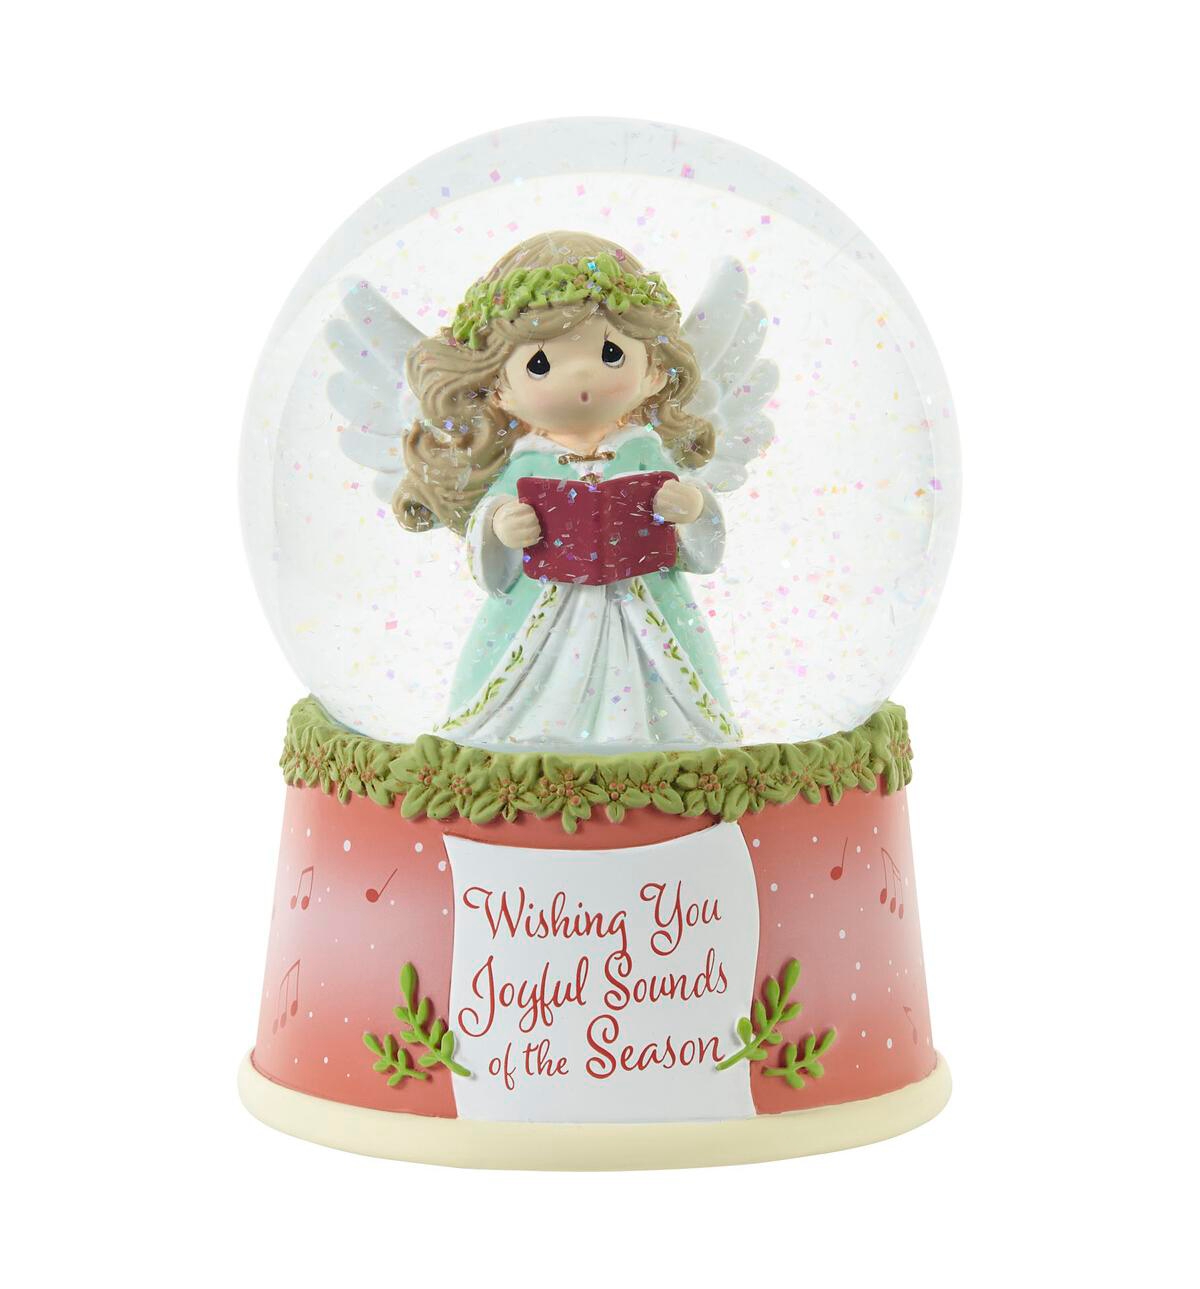 Precious Moments Wishing You Joyful Sounds Of The Season Annual Angel Resin, Glass Musical Snow Globe In Multicolored